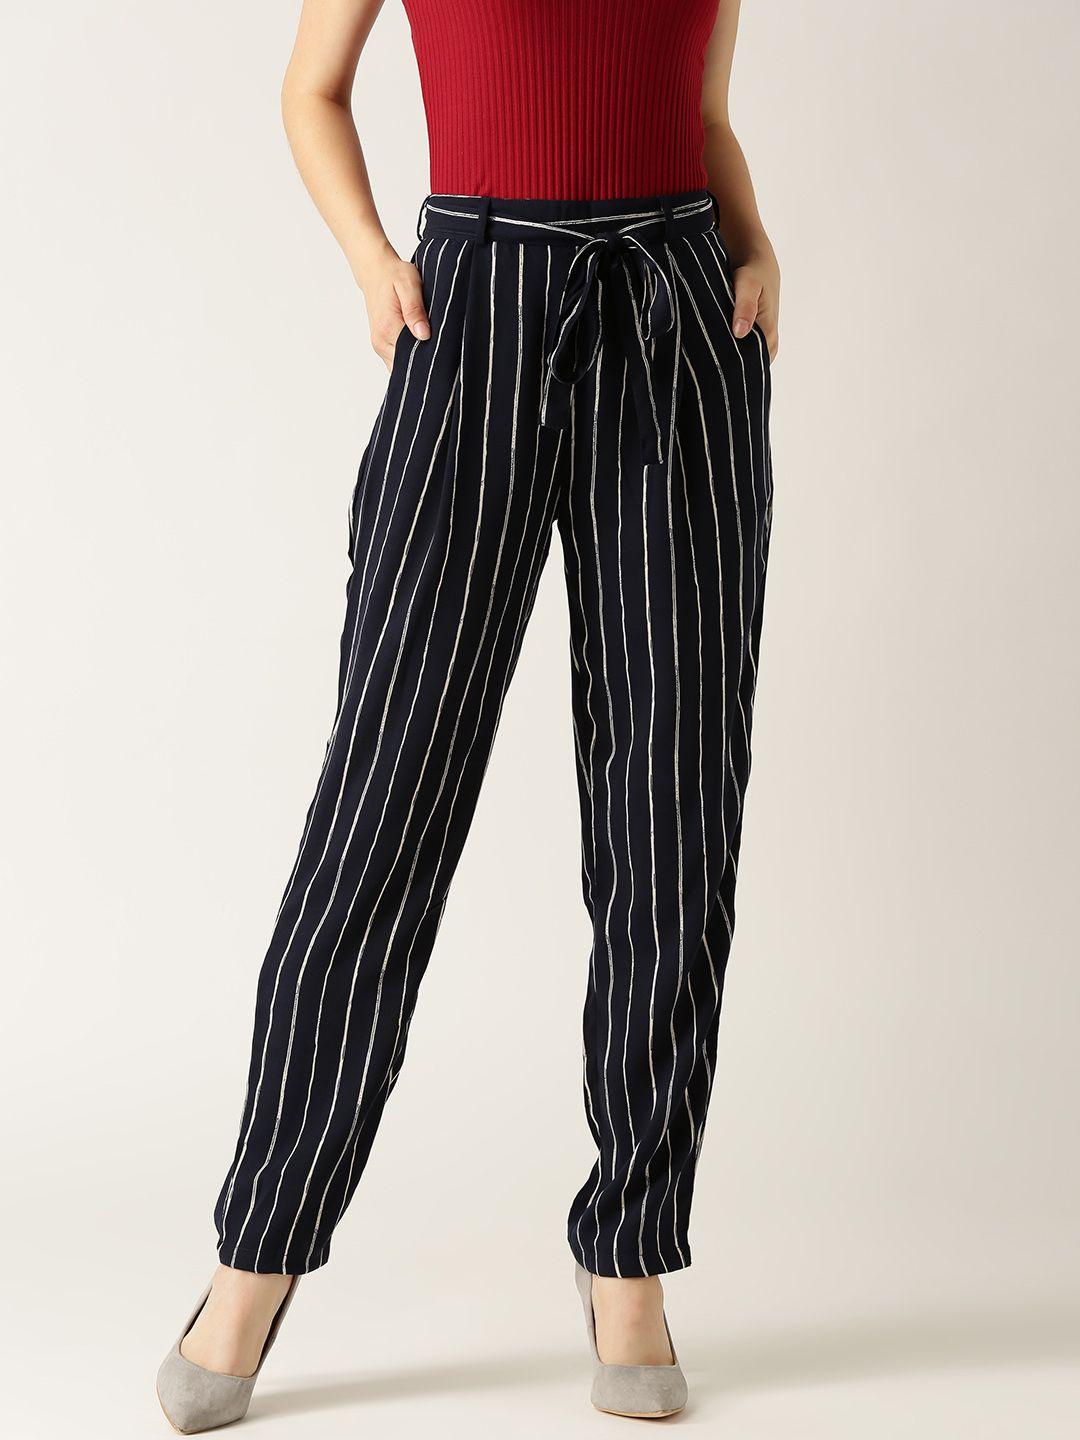 marie claire women navy & white original fit striped peg trousers